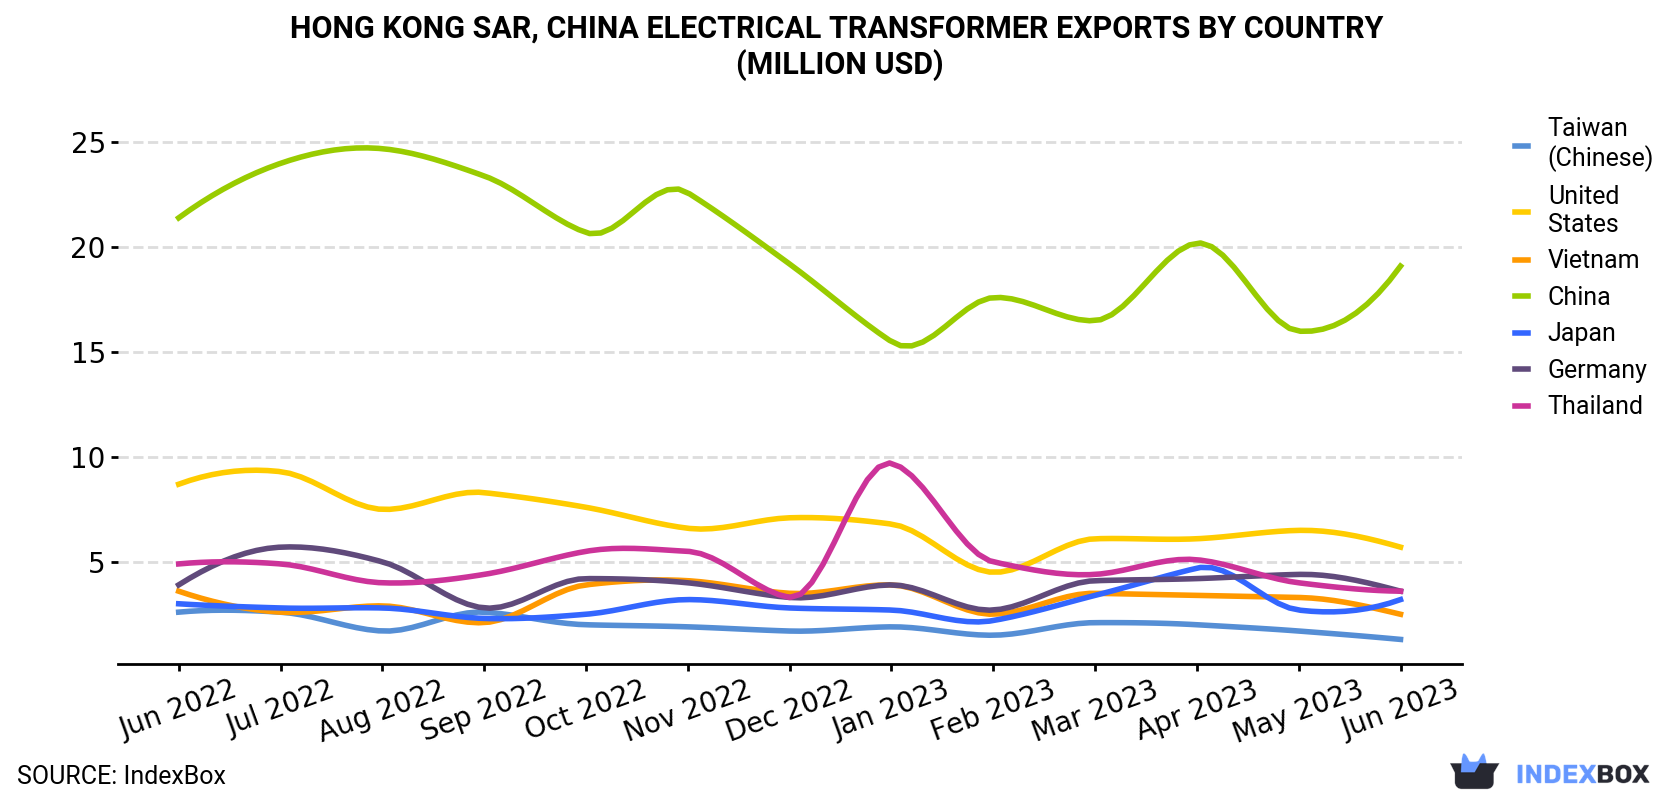 Hong Kong Electrical Transformer Exports By Country (Million USD)